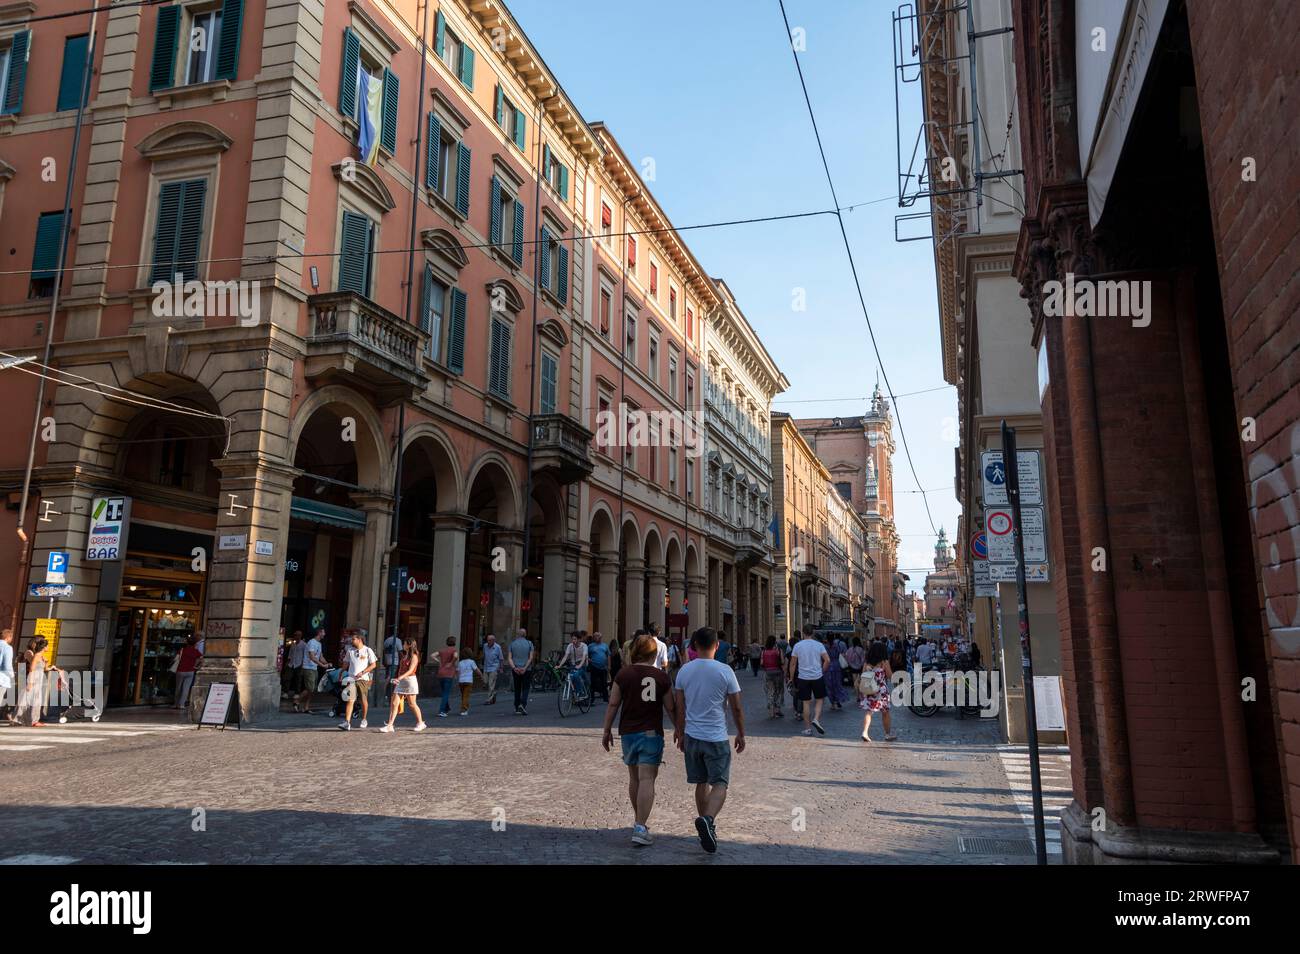 Shoppers are able to enjoy shopping on Via dell'Indipendenza in safety as the one kilometre long straight Avenue is closed to traffic on weekends in B Stock Photo